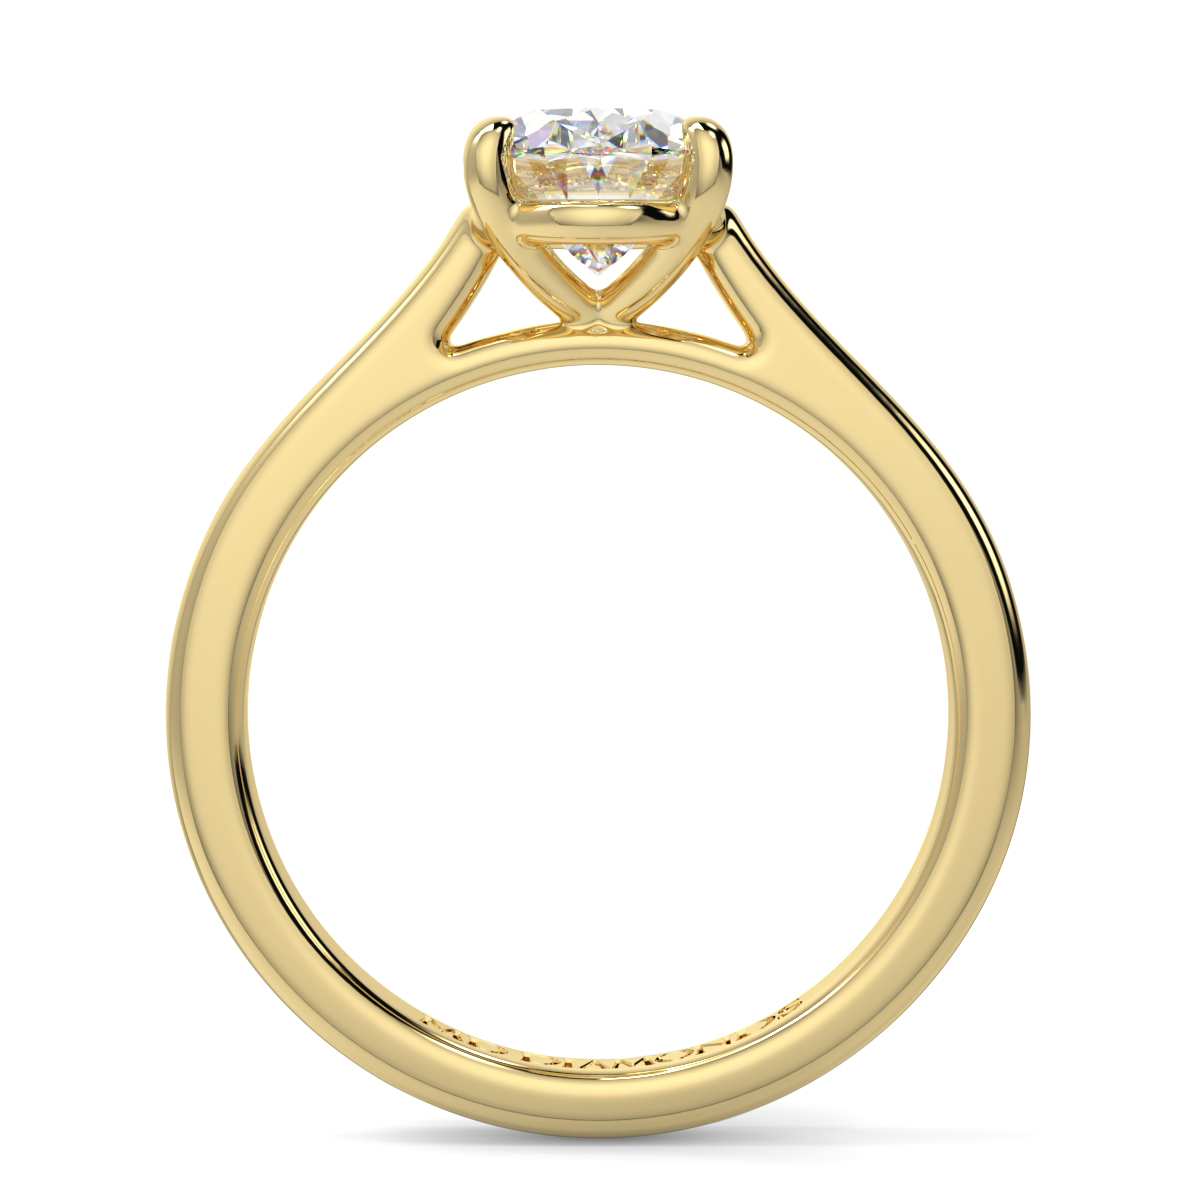 Oval 4 Claw Wed Fit Solitaire Ring